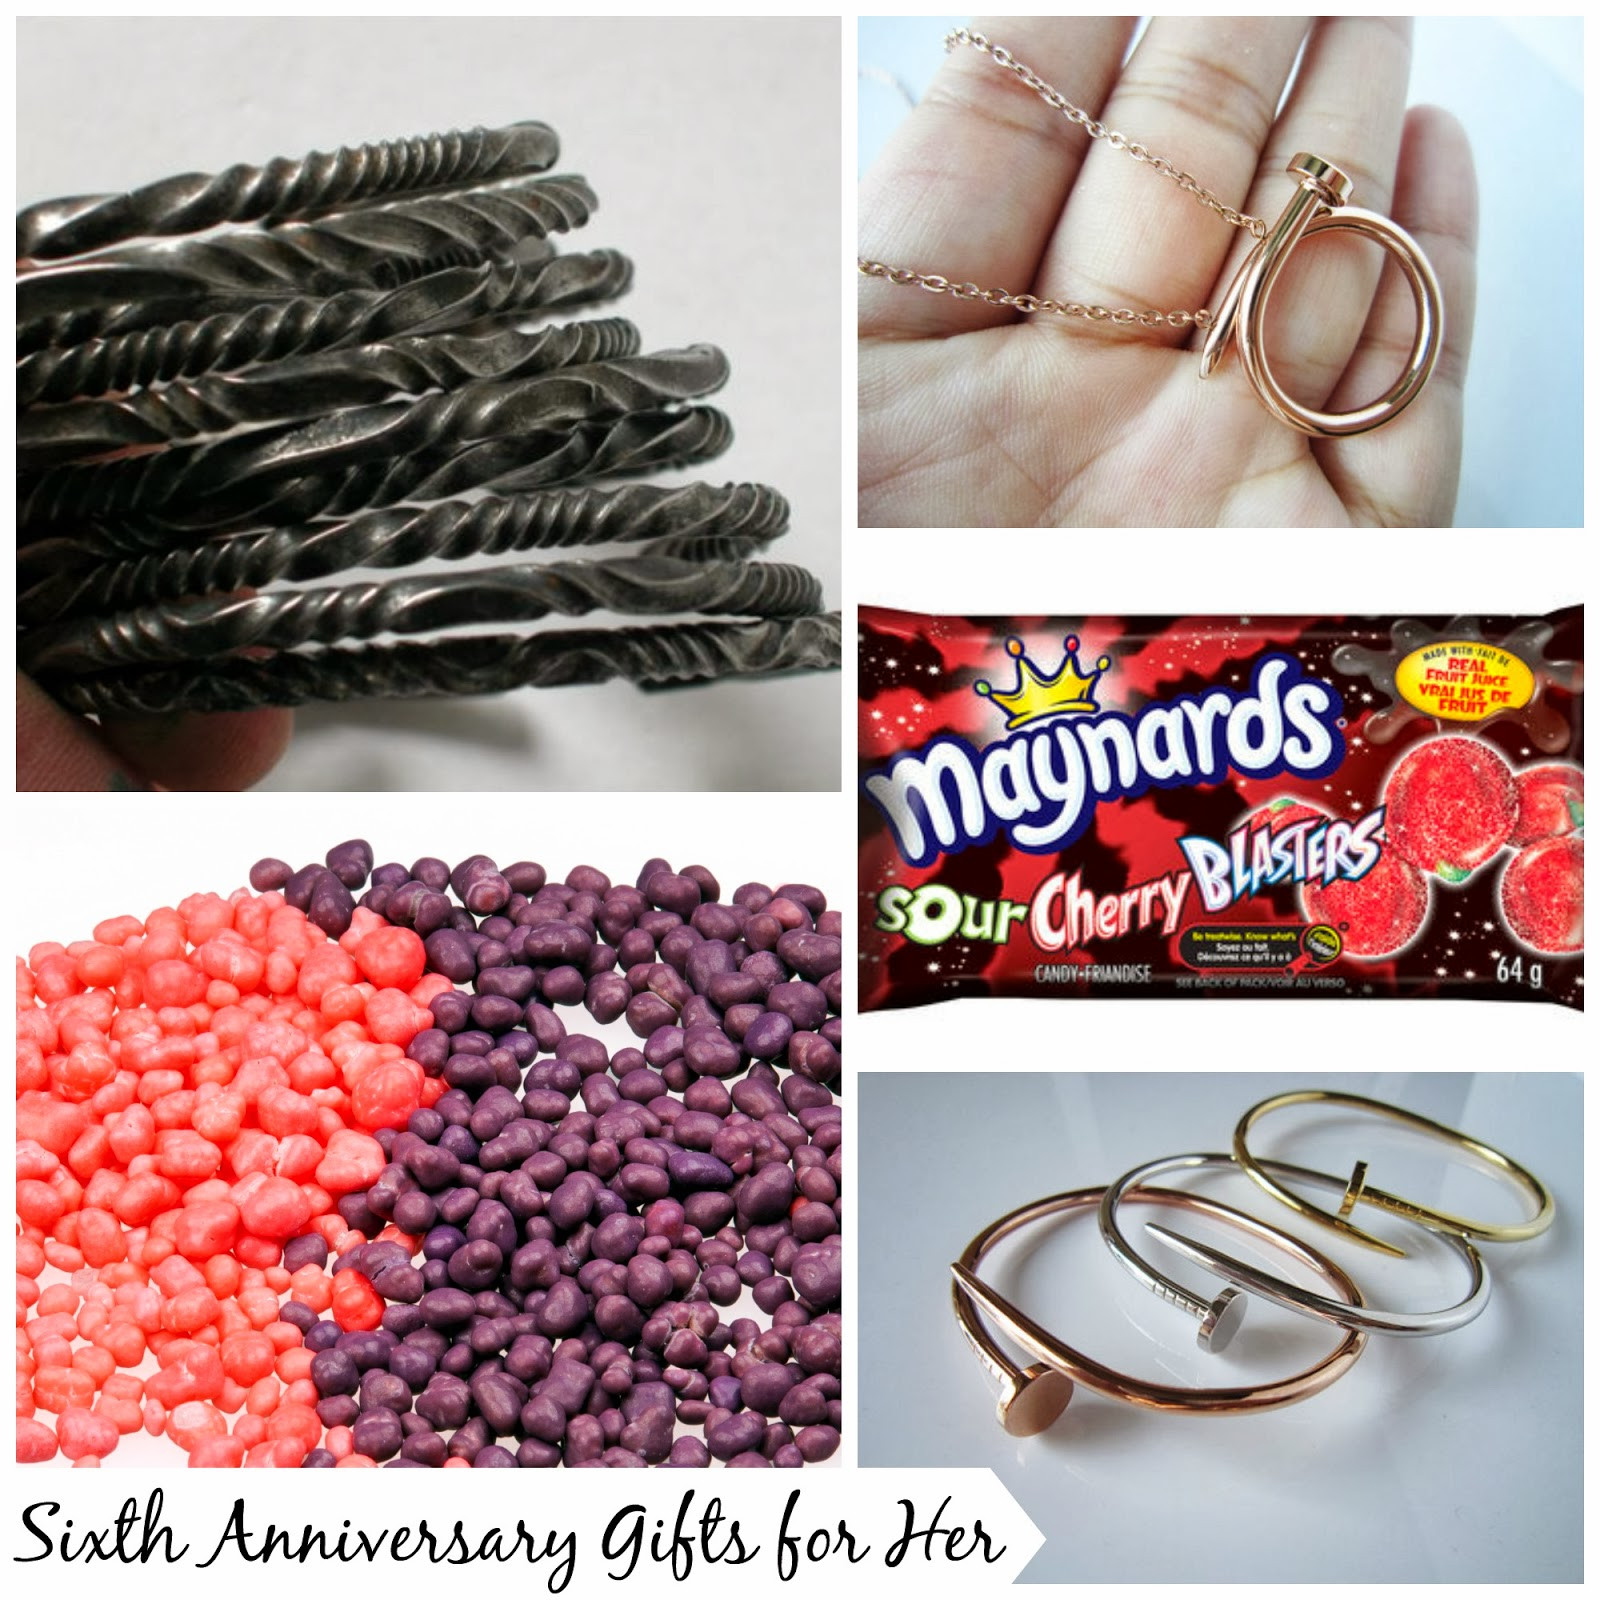 6 Year Anniversary Gift Ideas For Her
 Sweet Stella s Sixth Wedding Anniversary Gift Ideas for